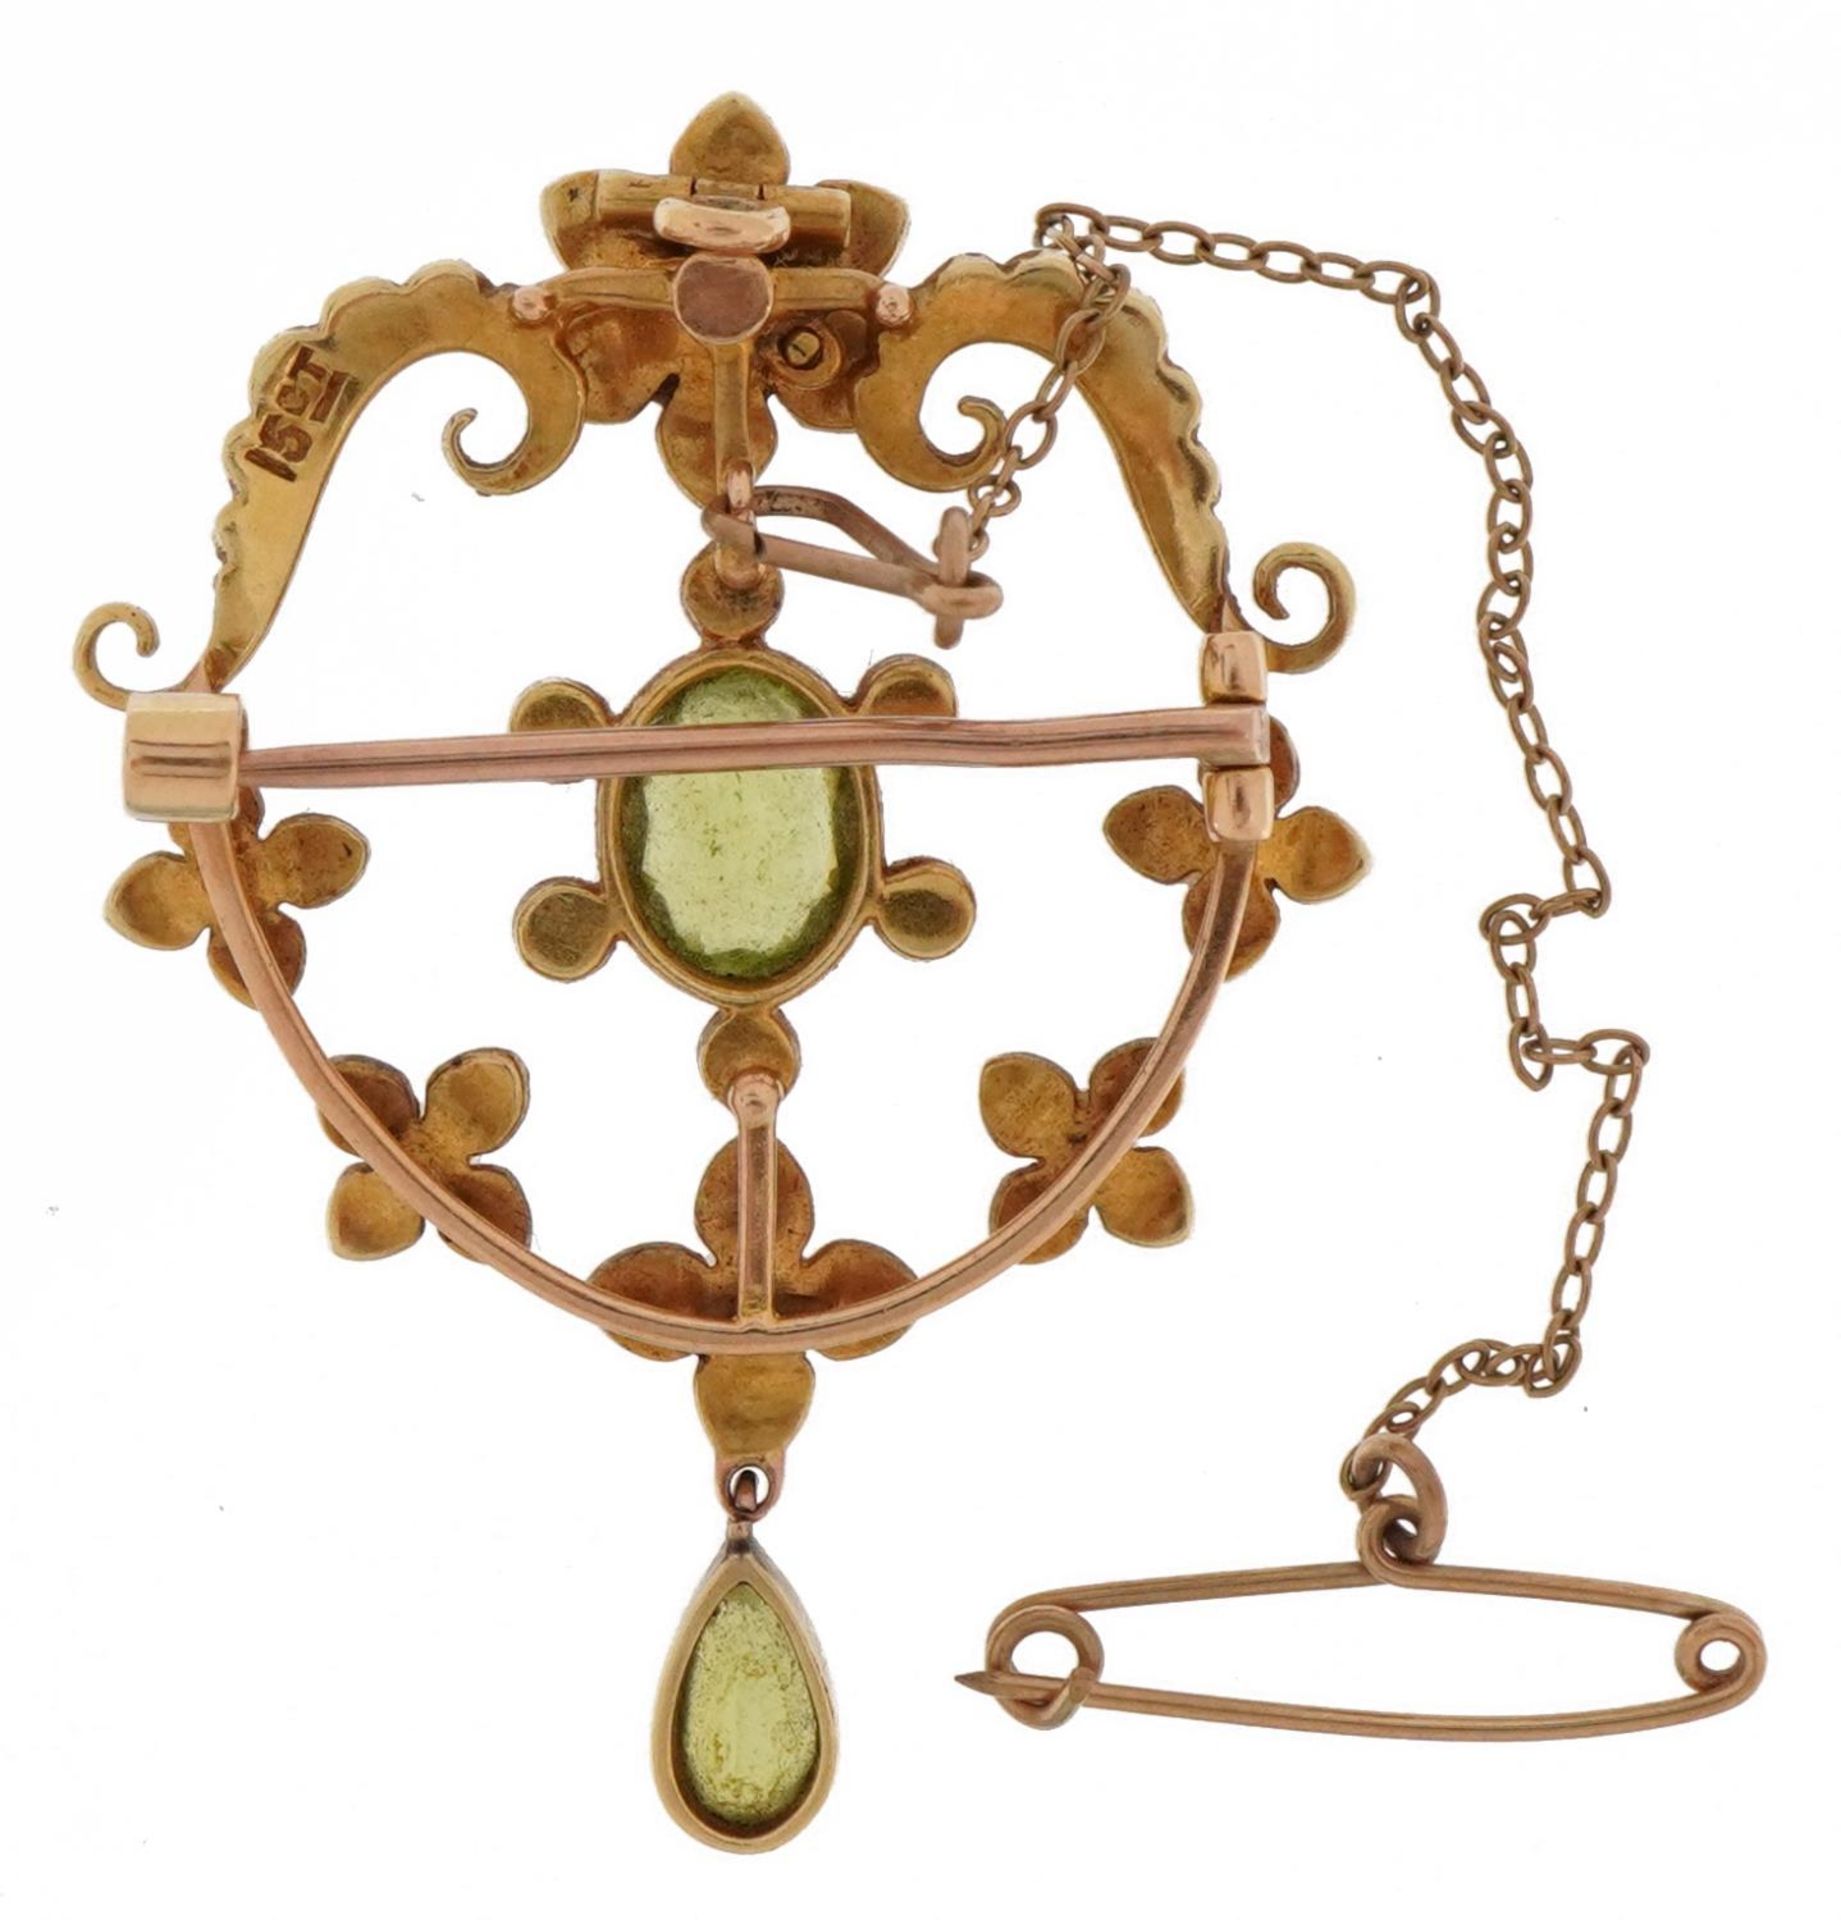 Edwardian 15ct gold peridot and seed pearl floral openwork drop pendant brooch with safety chain, - Image 2 of 3